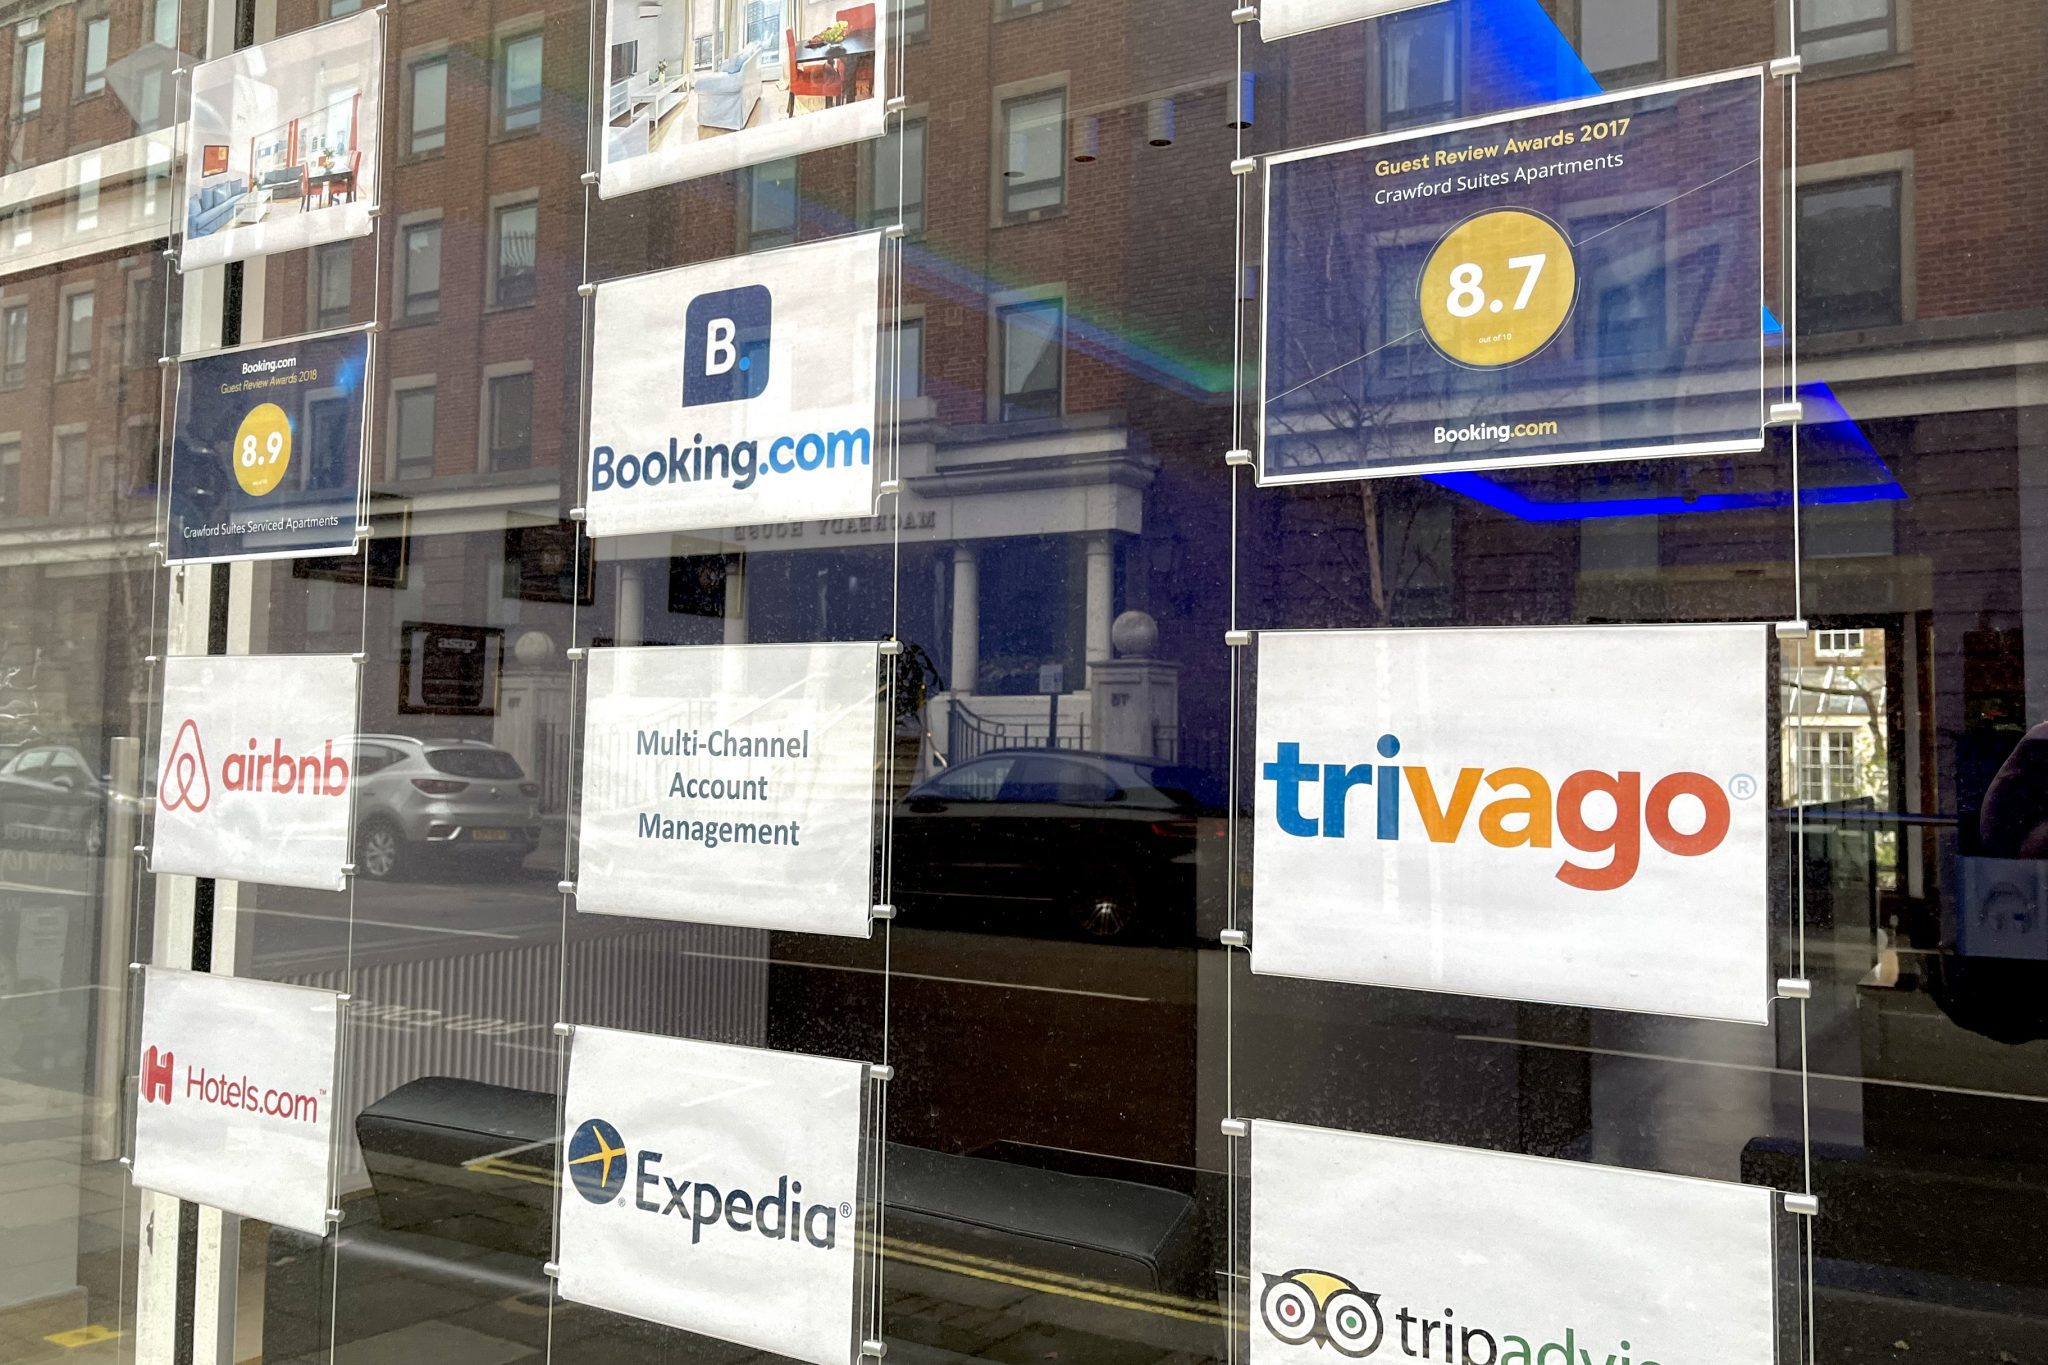 No worries about Google advertising here. A real estate management office in Central London promoting its multi-channel short-term rental listing prowess, including Trivago.